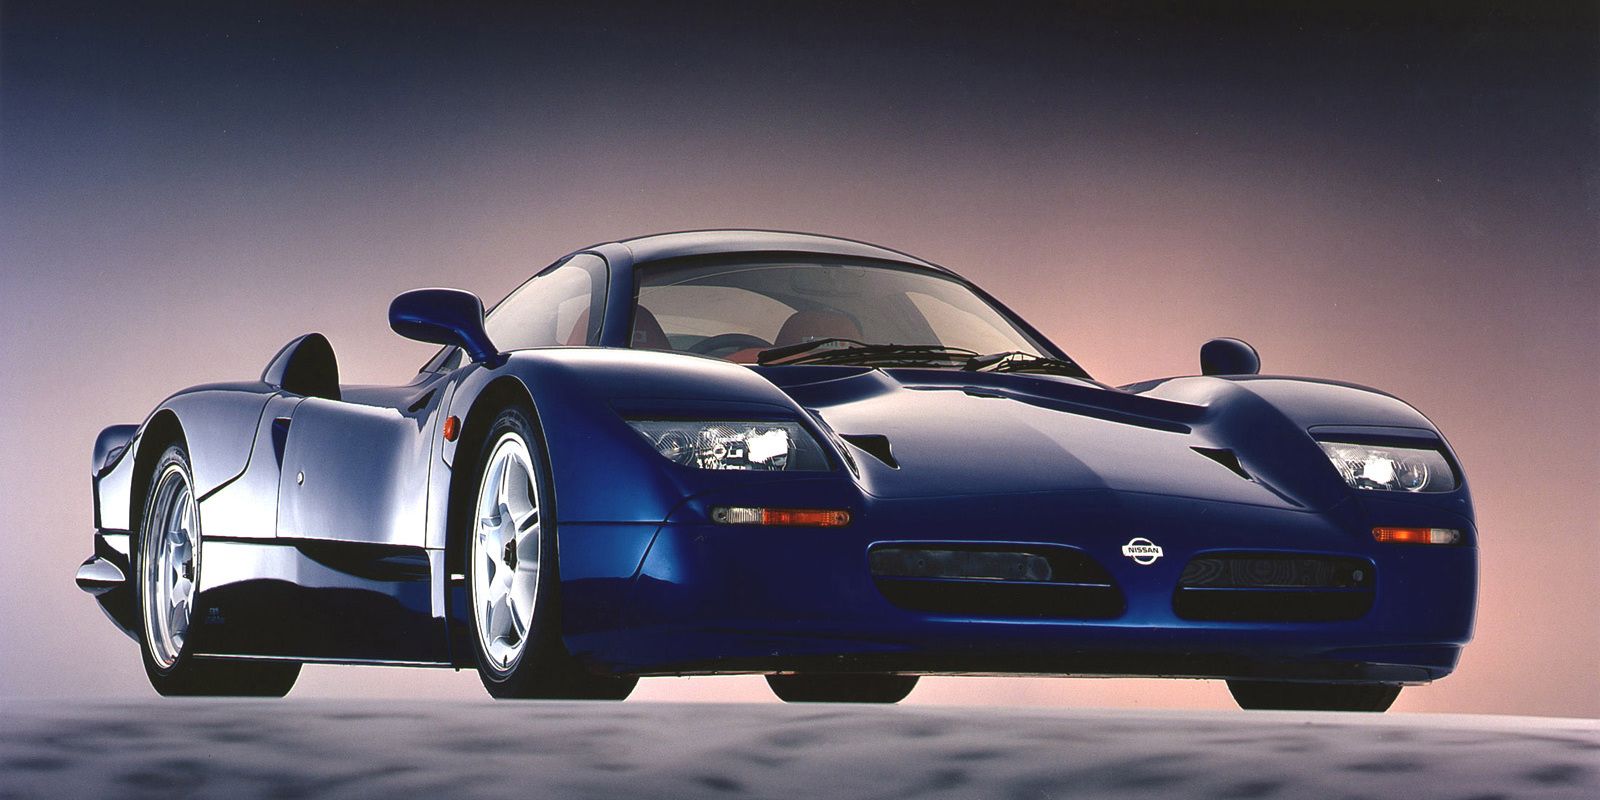 of the Coolest Supercars of the 1990s